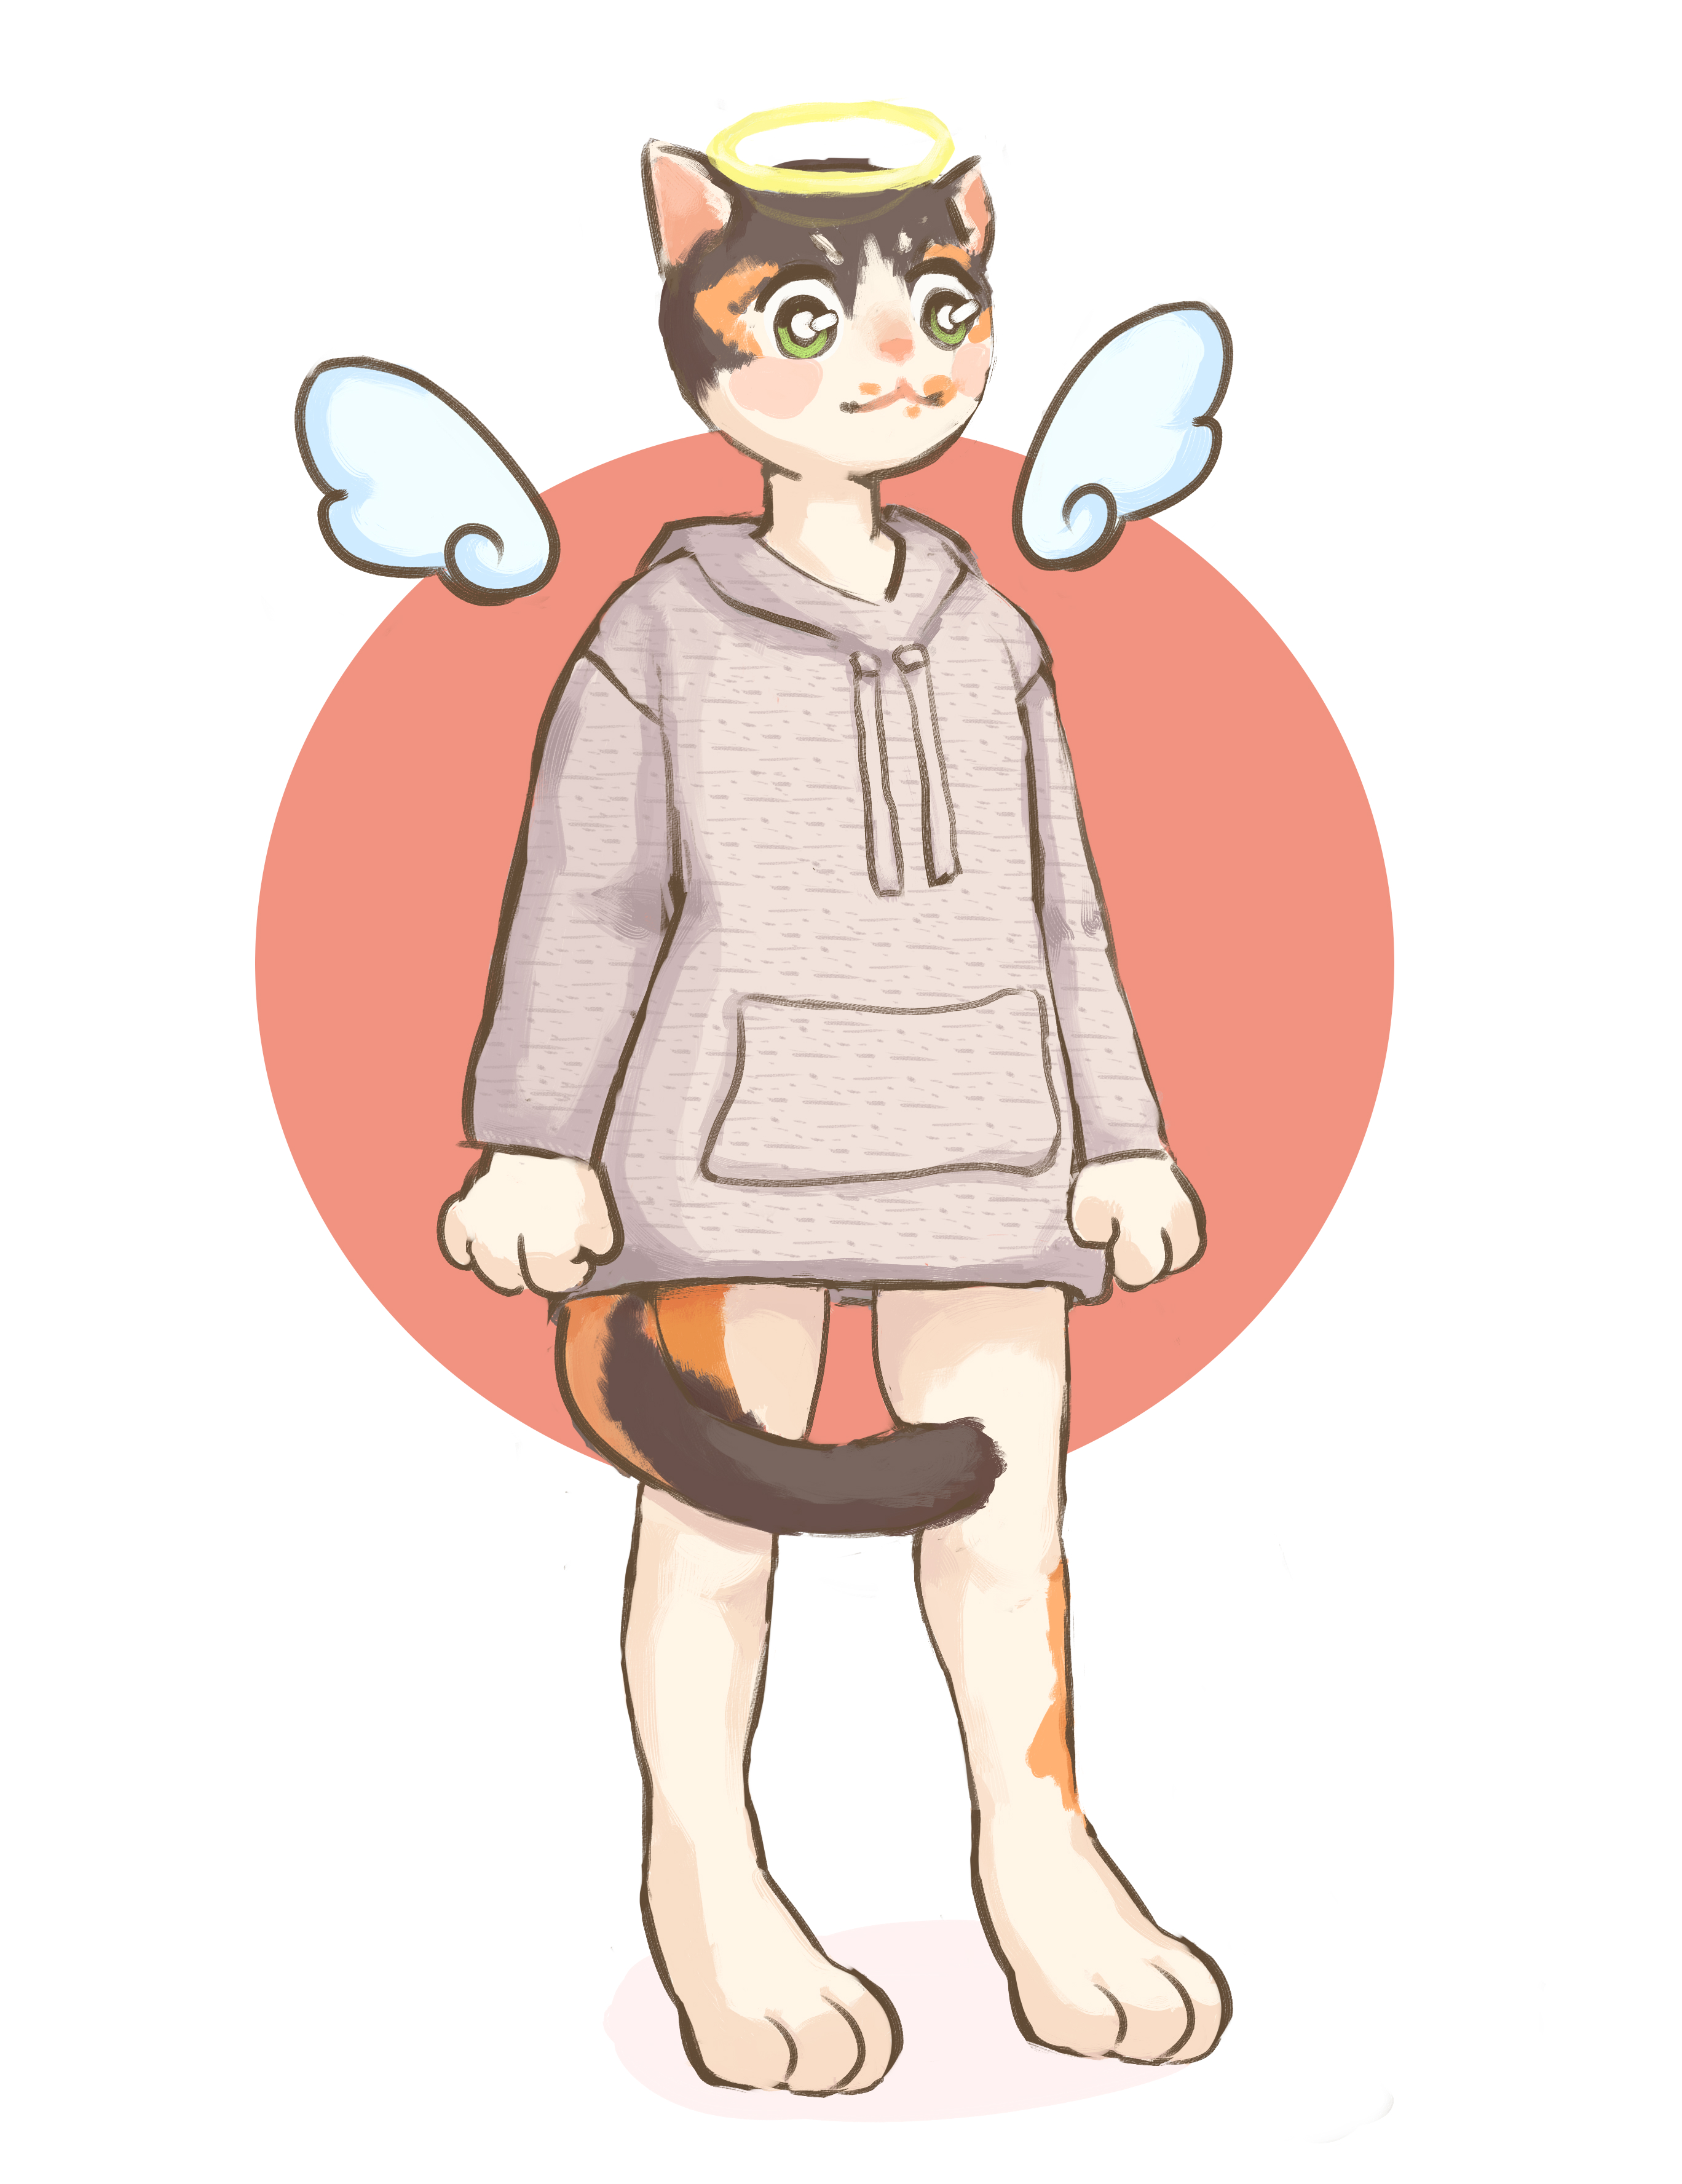 stylized cartoon illustration of anthro calico cat with angel wings and halo, wearing a grey hoodie